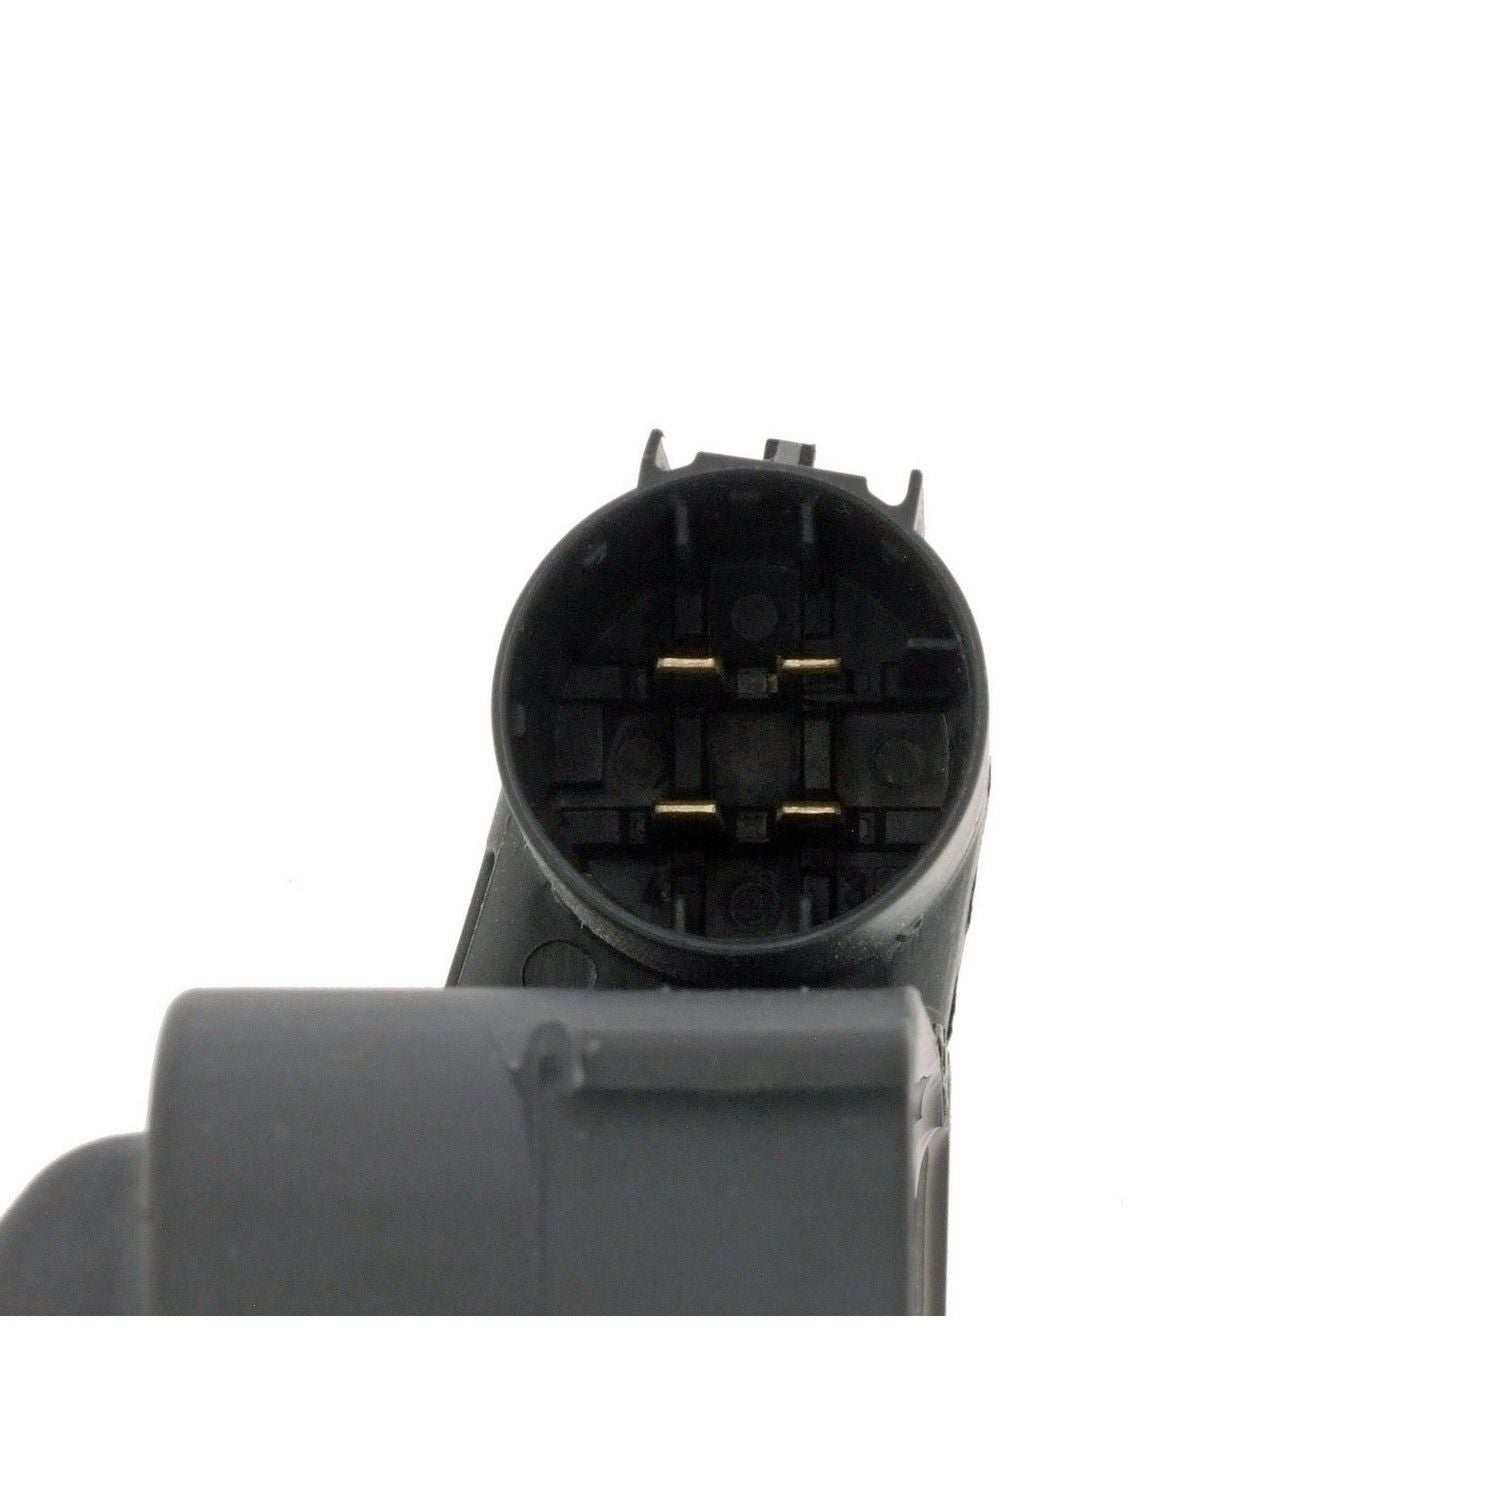 PRENCO Direct Ignition Coil  top view frsport 36-8239